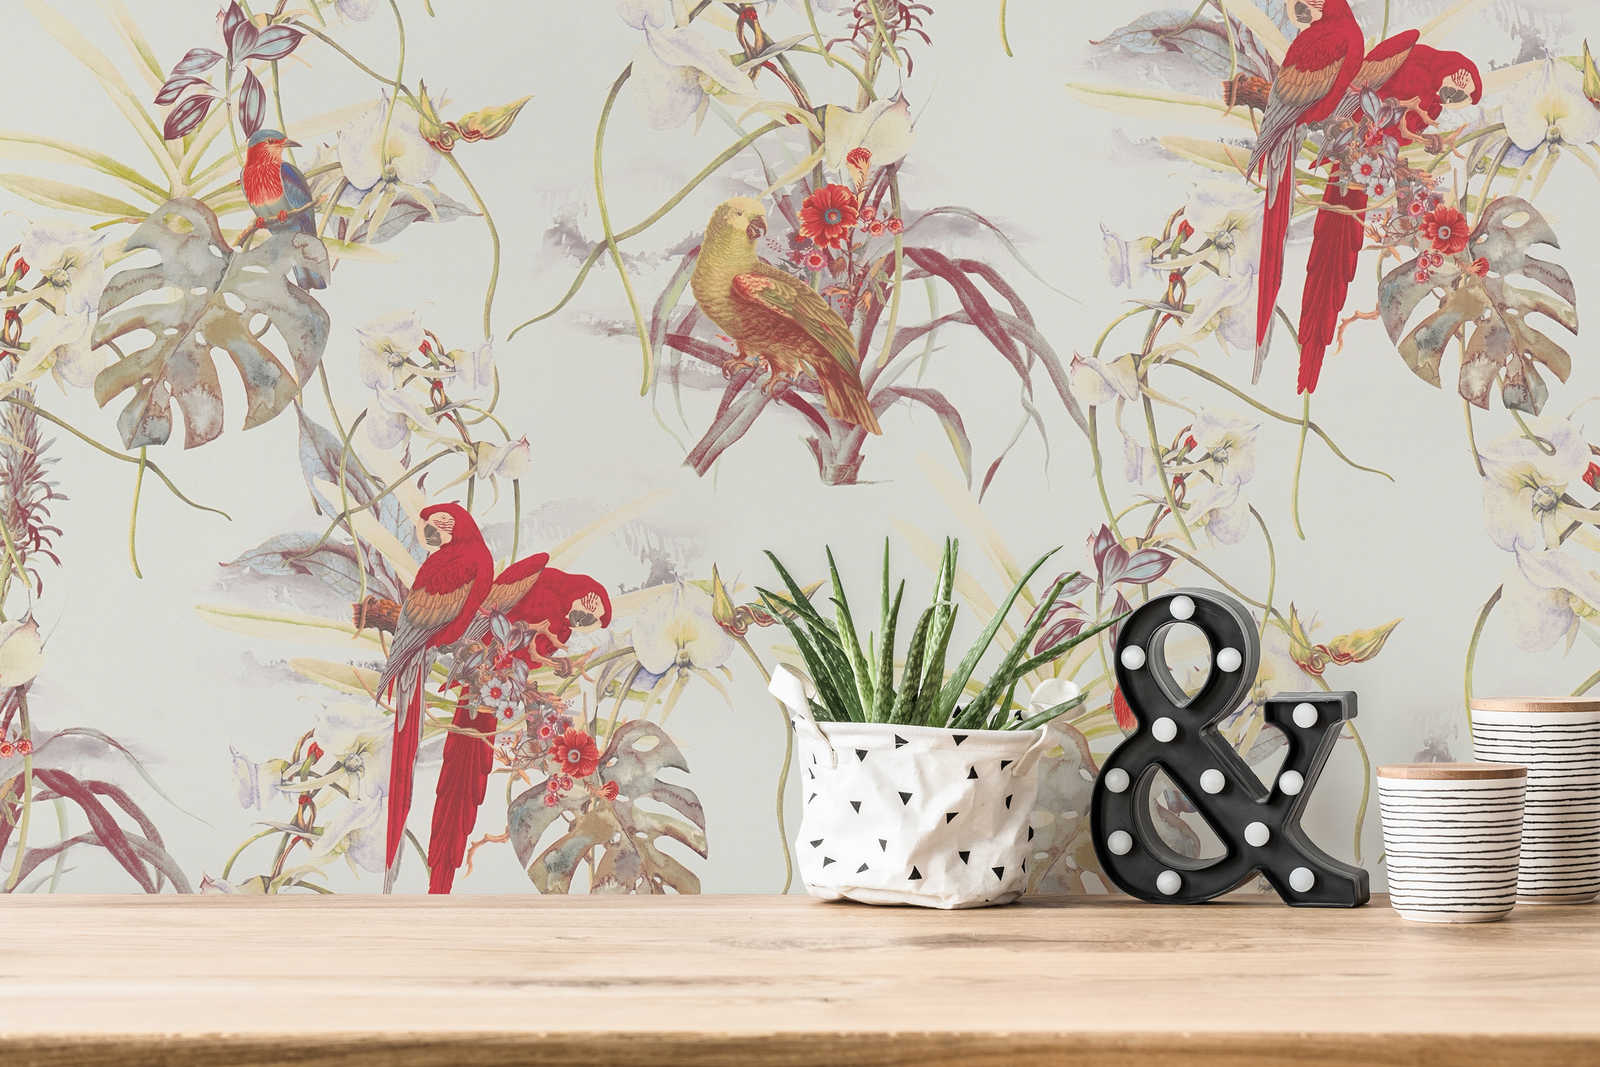             Wallpaper tropical design, parrot & exotic flowers - white, red
        